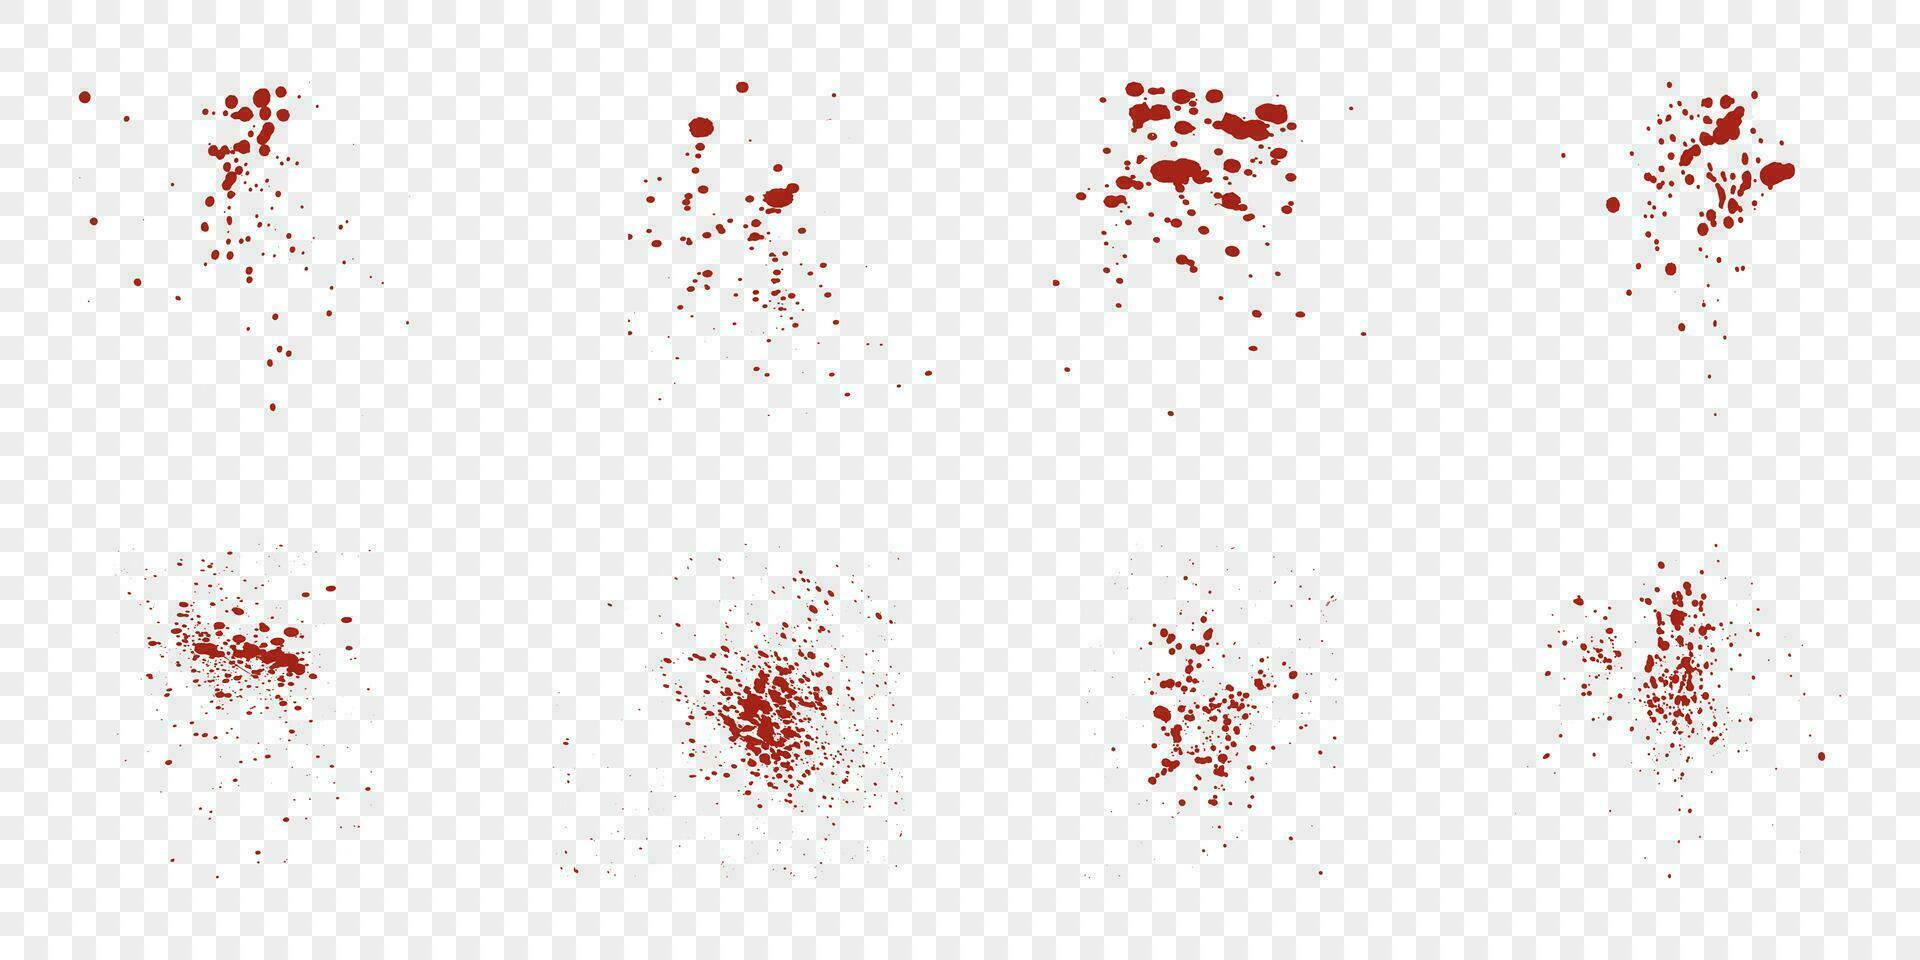 Paint Ink Stain Texture Set. Red Grunge Splash. Crime Mark Collection. Blood Drip Spatter. Abstract Messy Splat Pattern. Bloodstain Splatter. Isolated Vector Illustration.